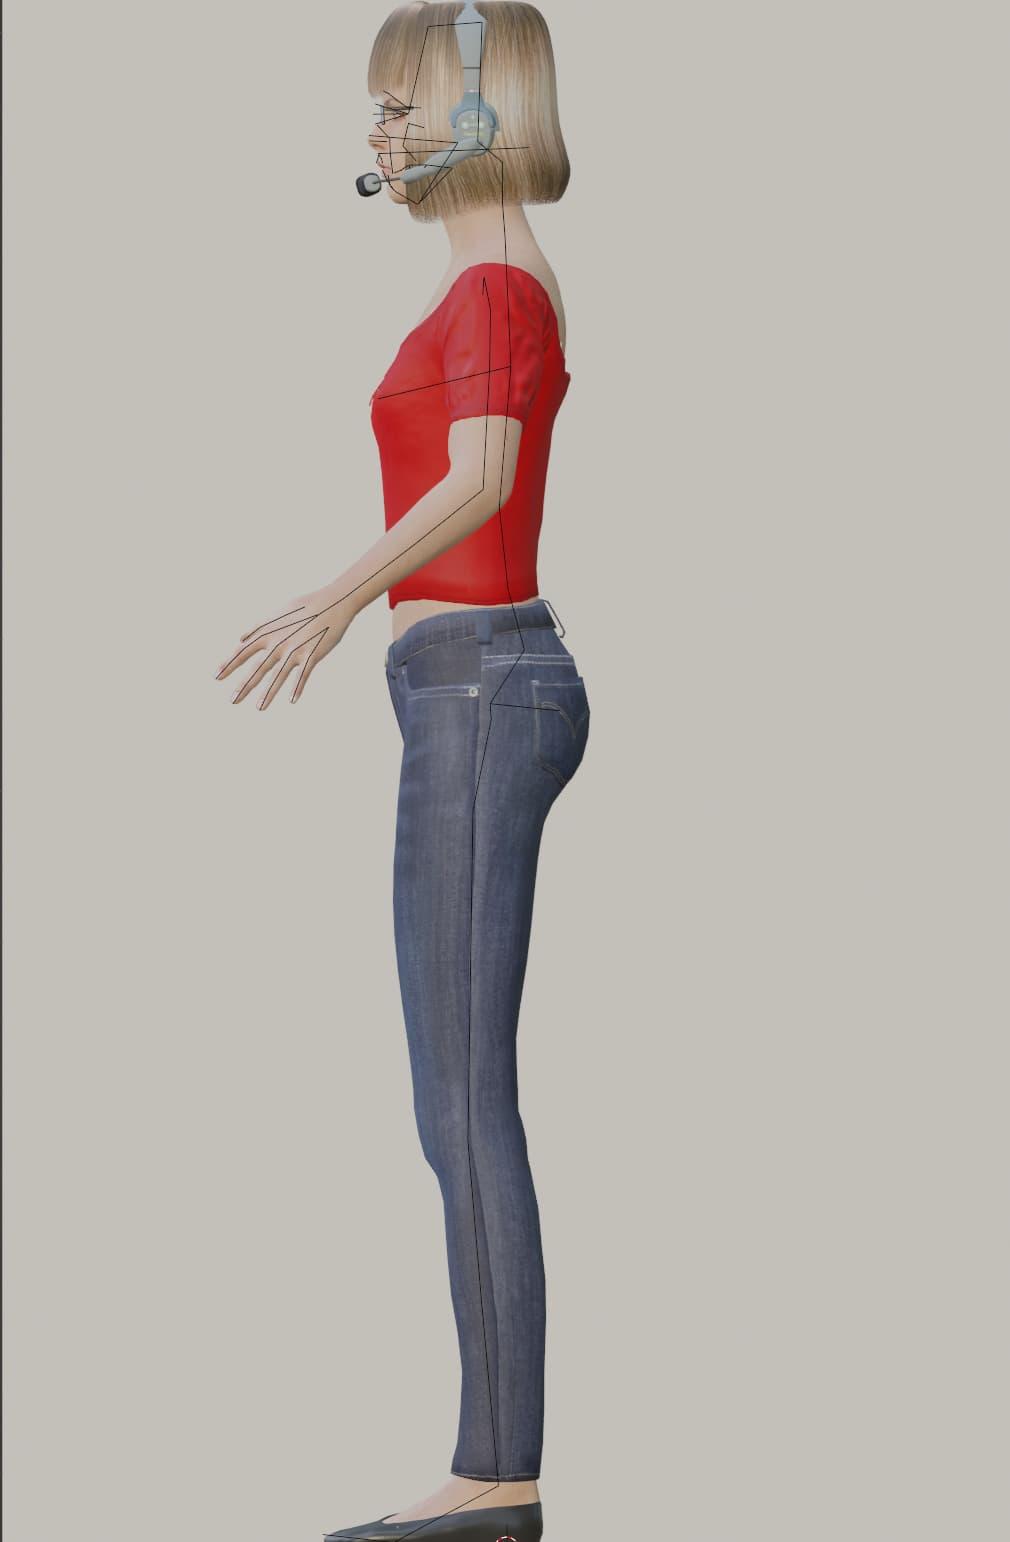 Side profile view of a 3D model of a blonde woman in a red shirt and blue jeans, wearing glasses and a headset. There are lines around the face and parts of the body, because I forgot to hide the rig